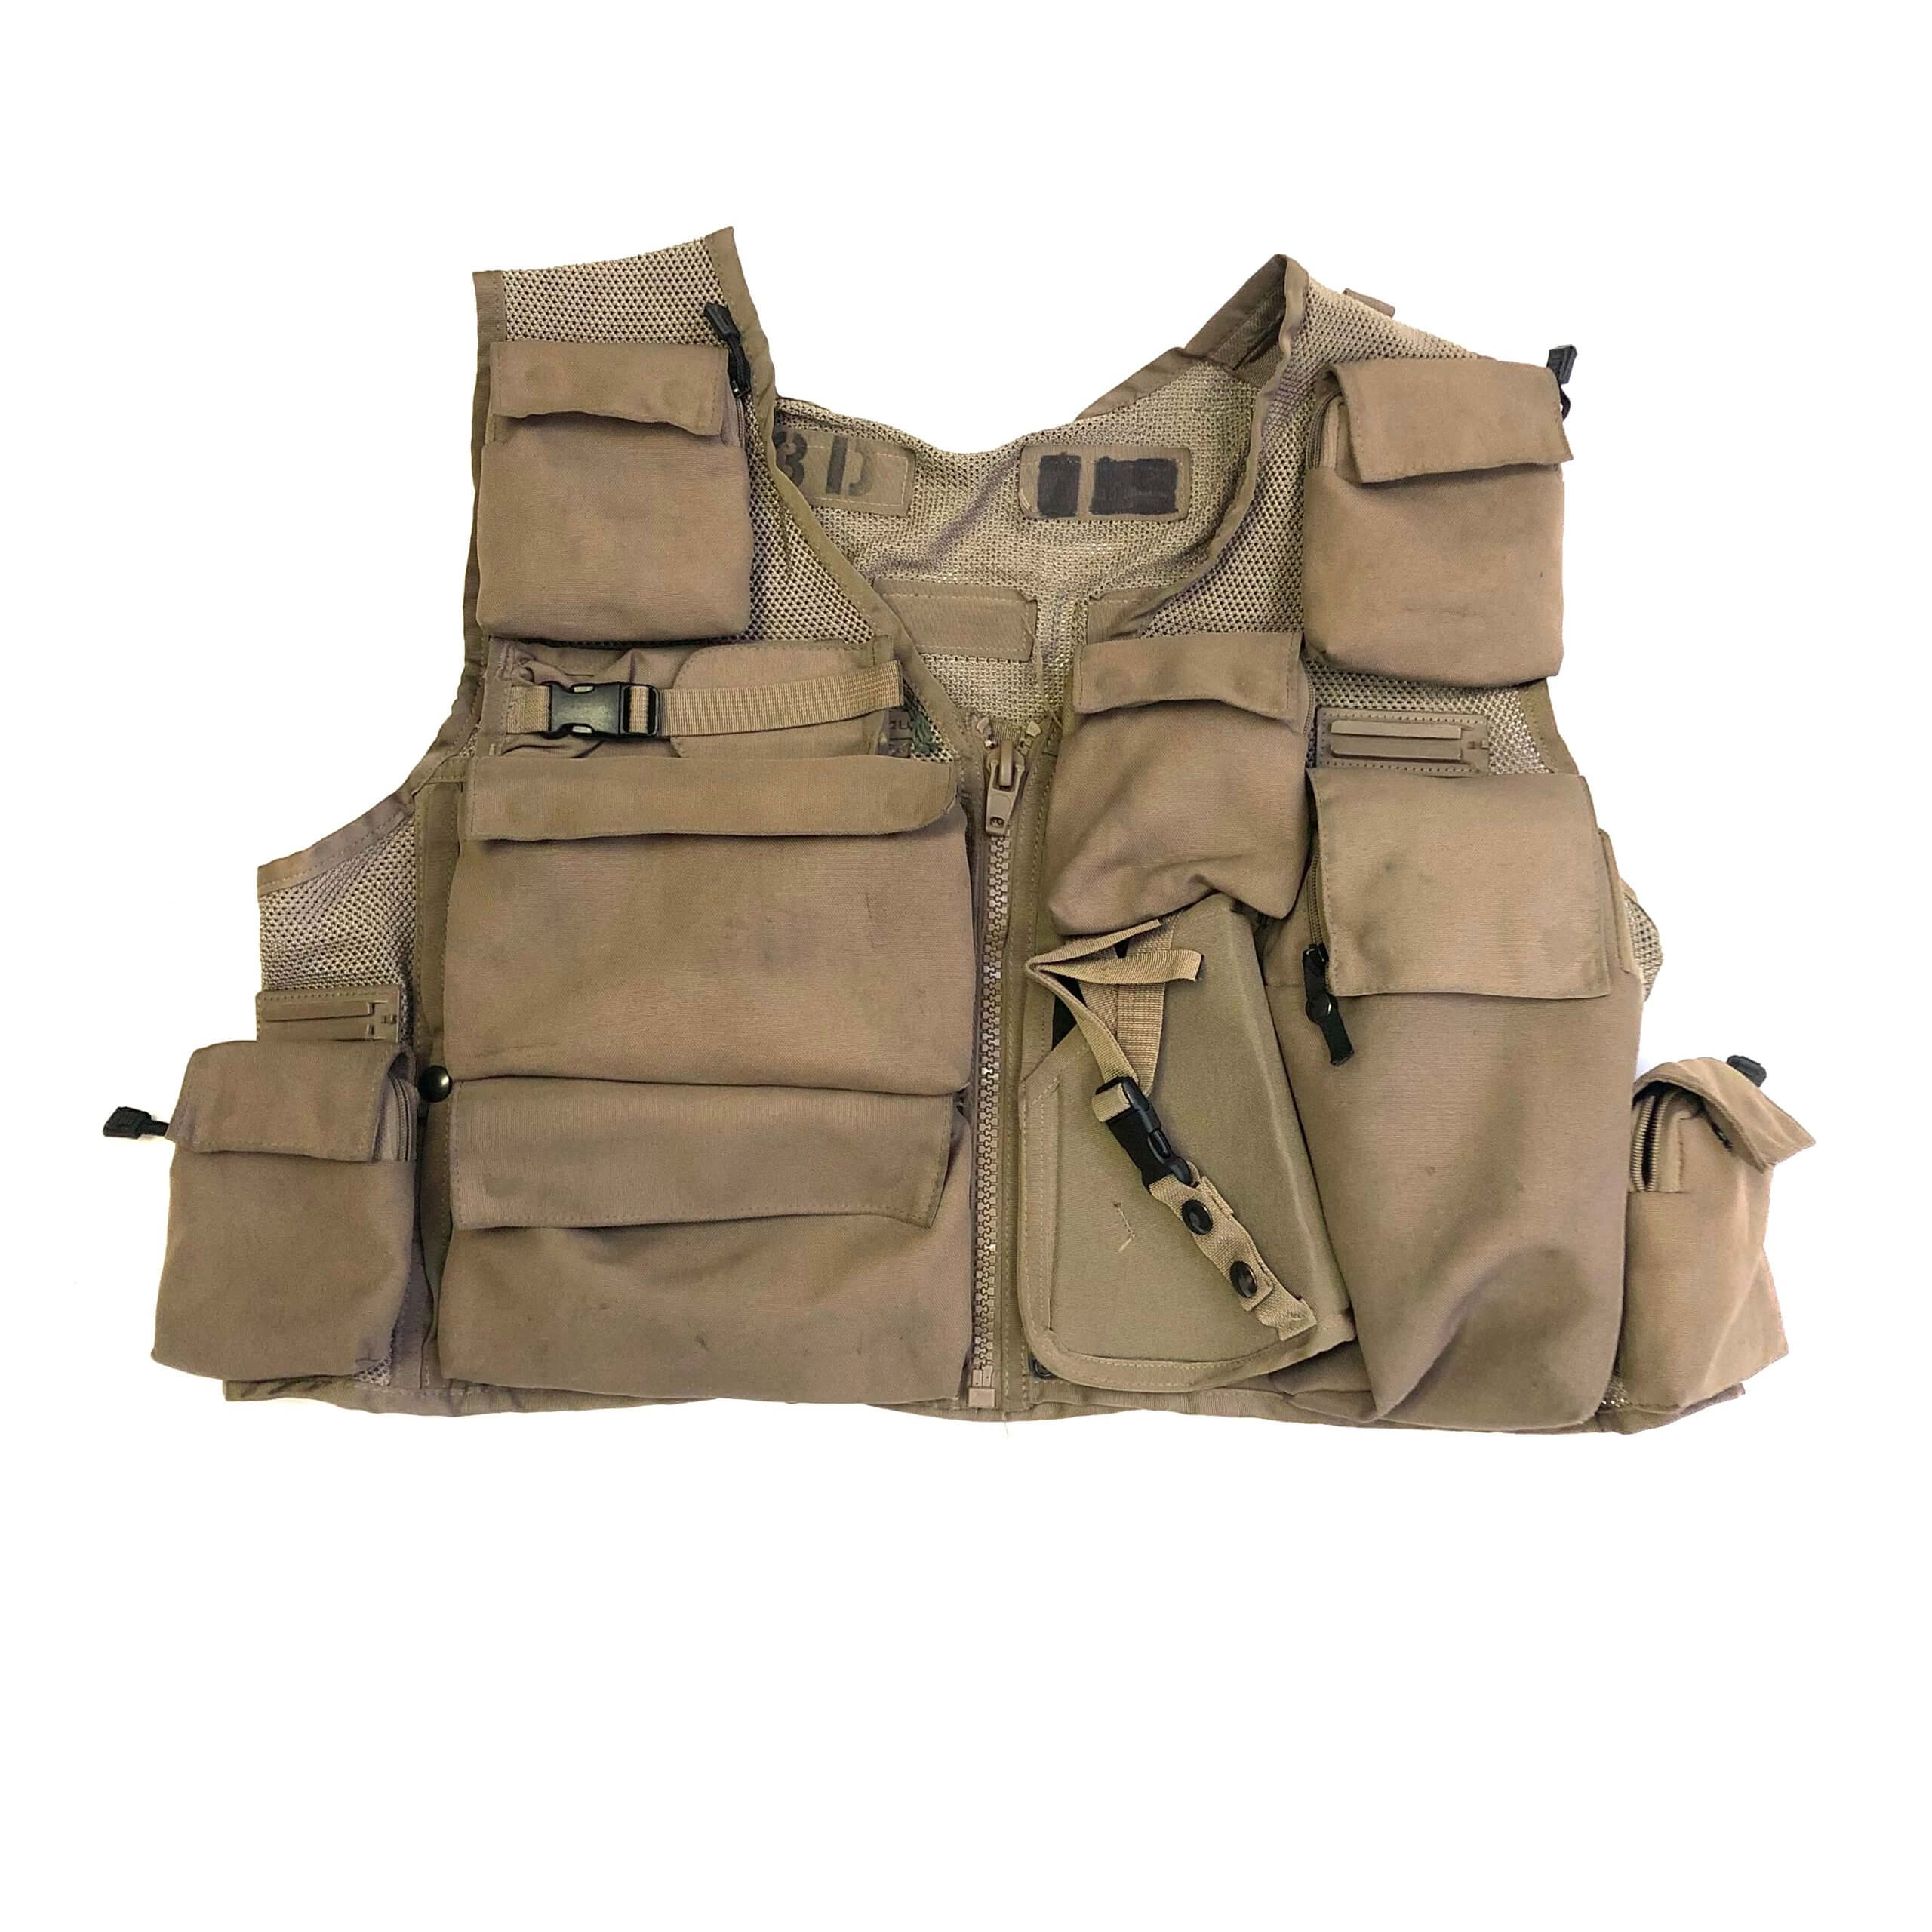 cigar ekspedition Pacific Aircrew Vest for Sale - Survival Incorporated - Snap Trak - Genuine Issue